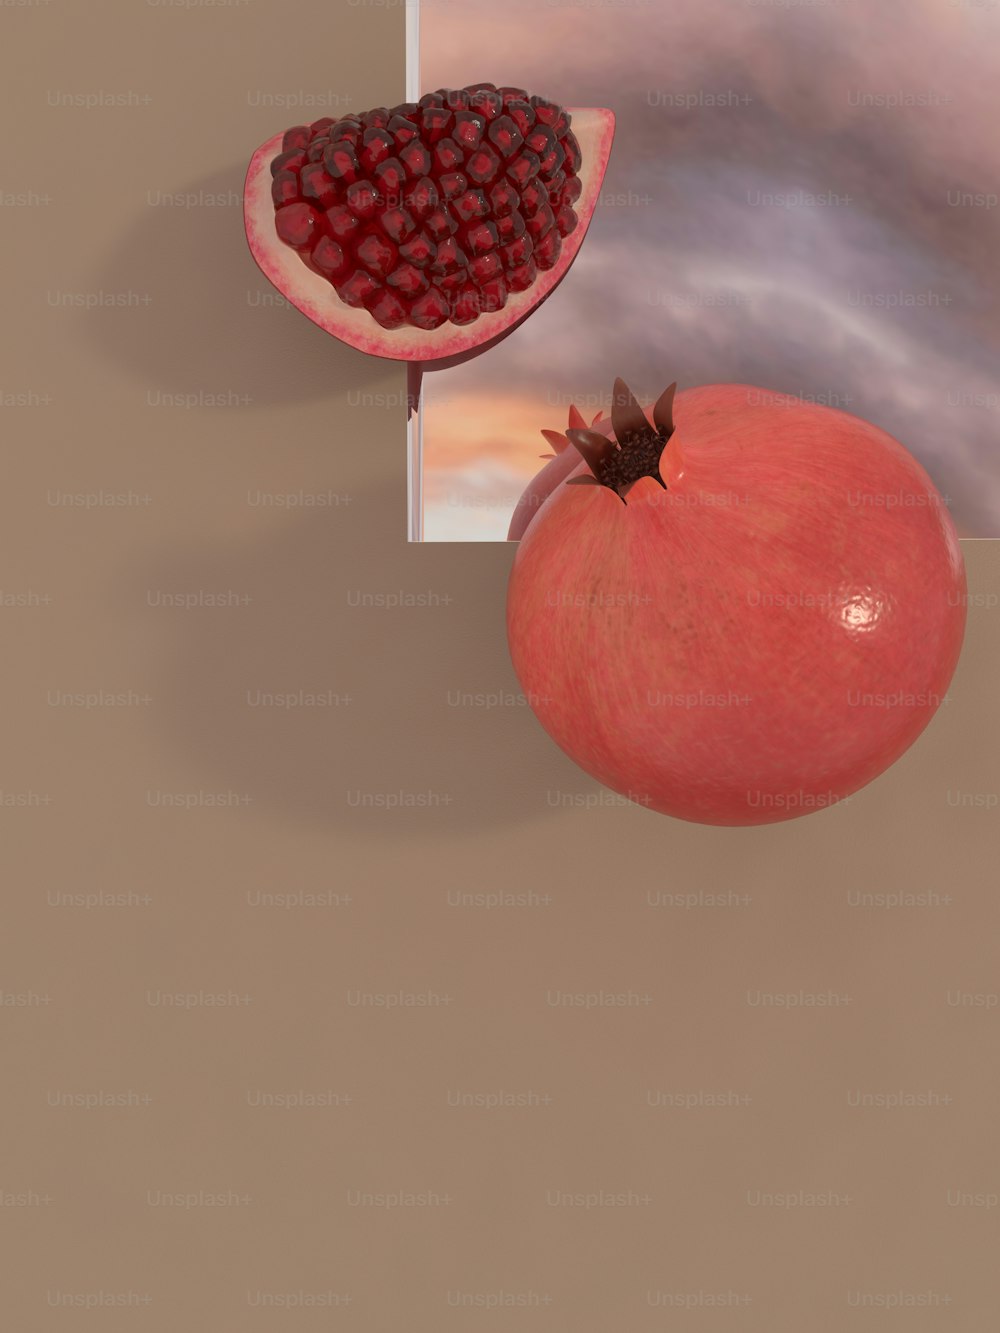 a picture of a pomegranate and a piece of fruit